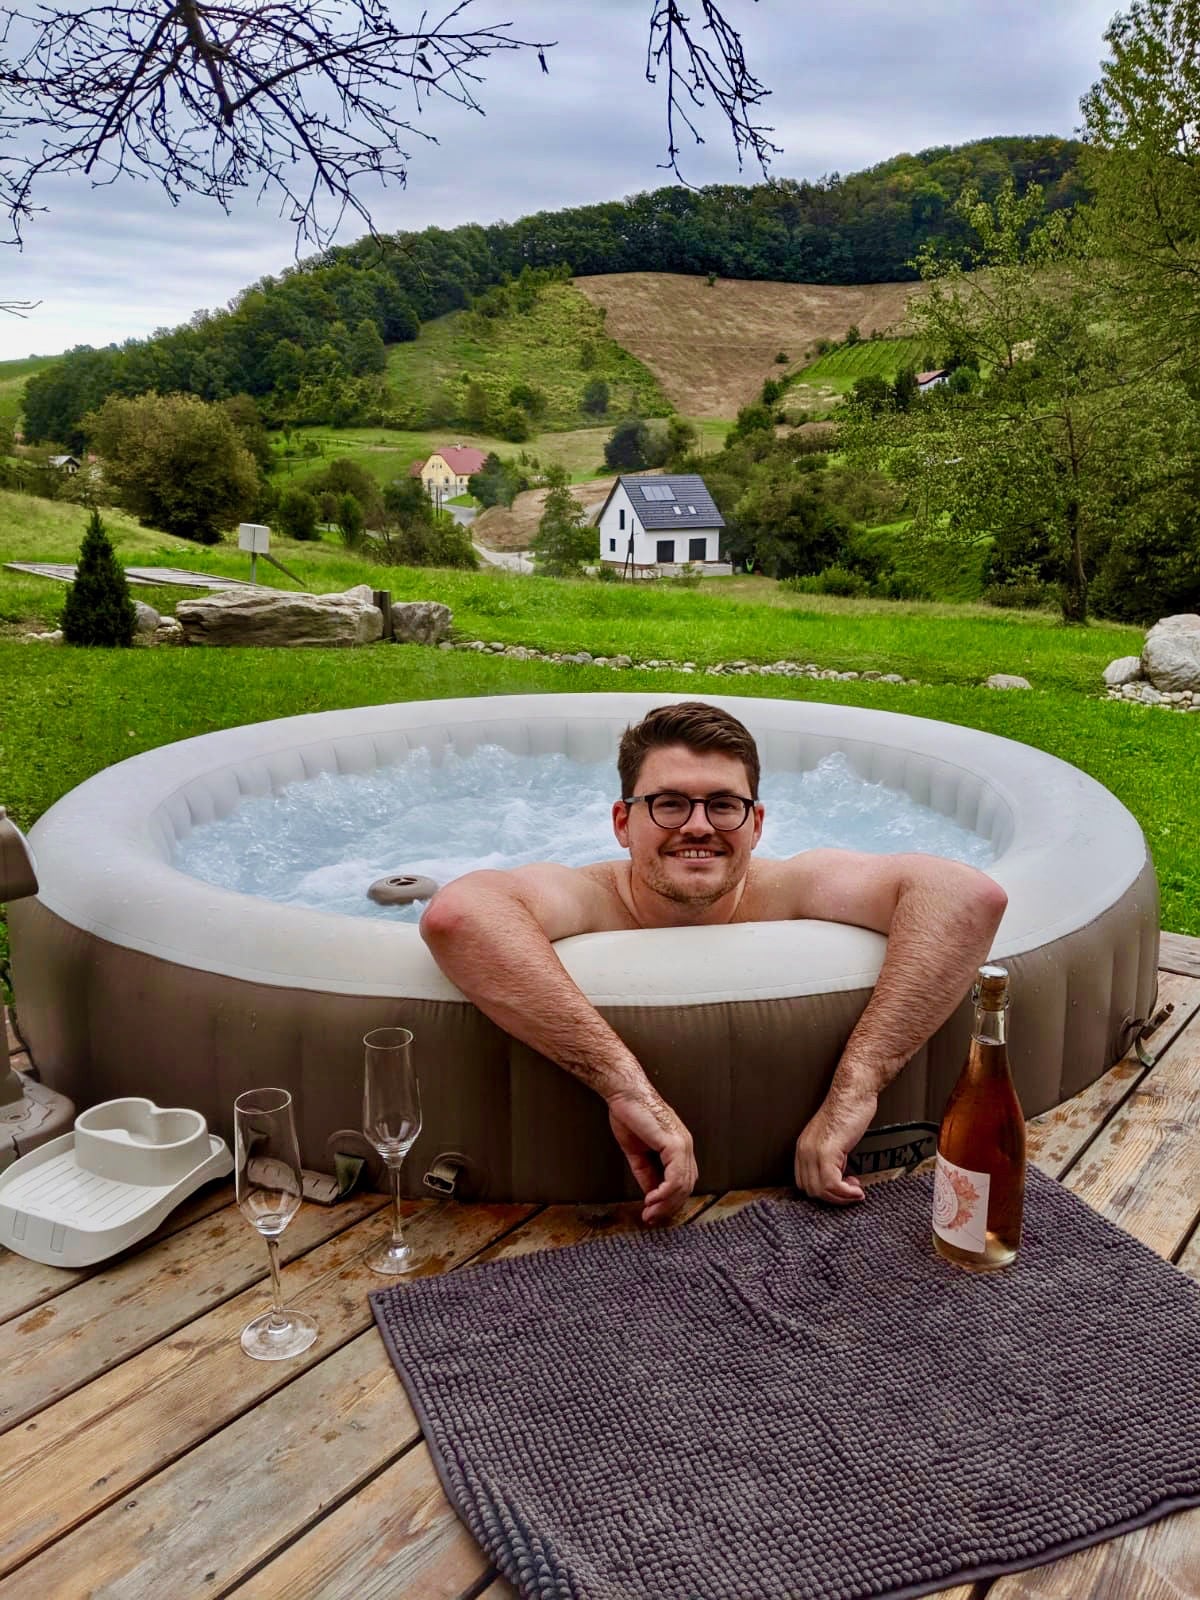 Glamping in Slovenia: Man in hot tub smiling at the camera, with vineyards in the background and a bottle of sparkling wine in front of him